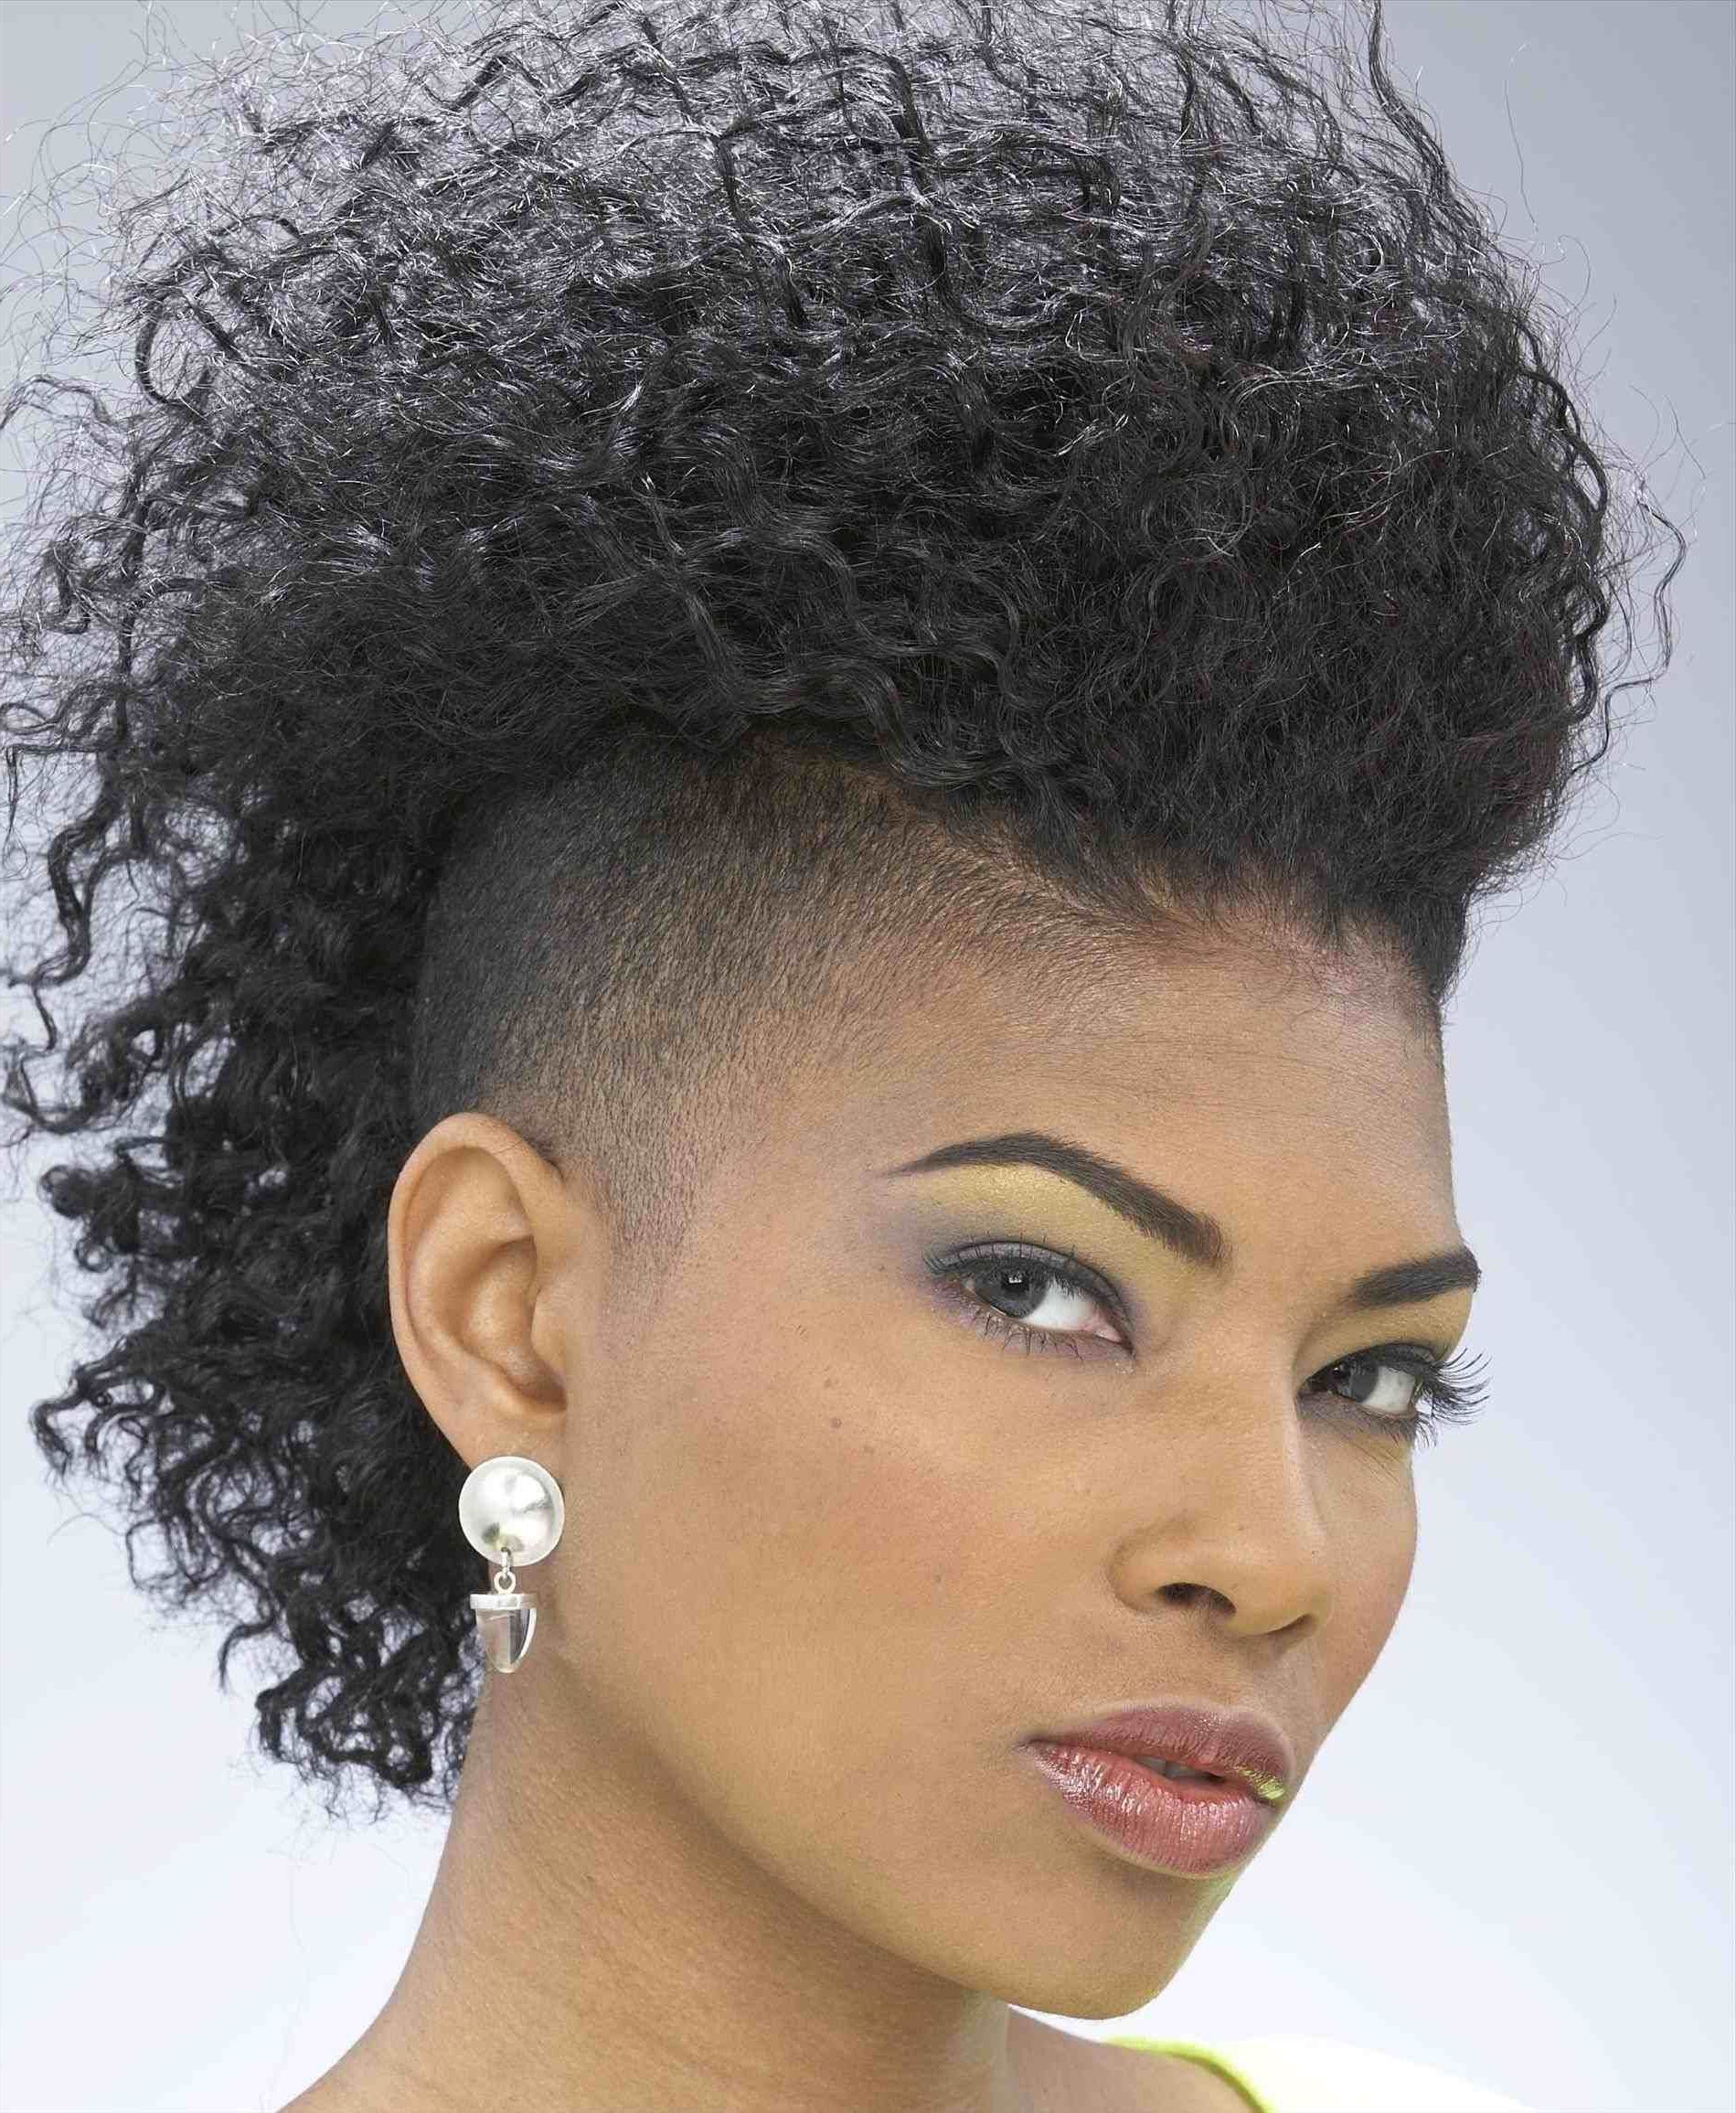 Hair 2018, Curly Hair Pertaining To Favorite Curly Haired Mohawk Hairstyles (Gallery 20 of 20)